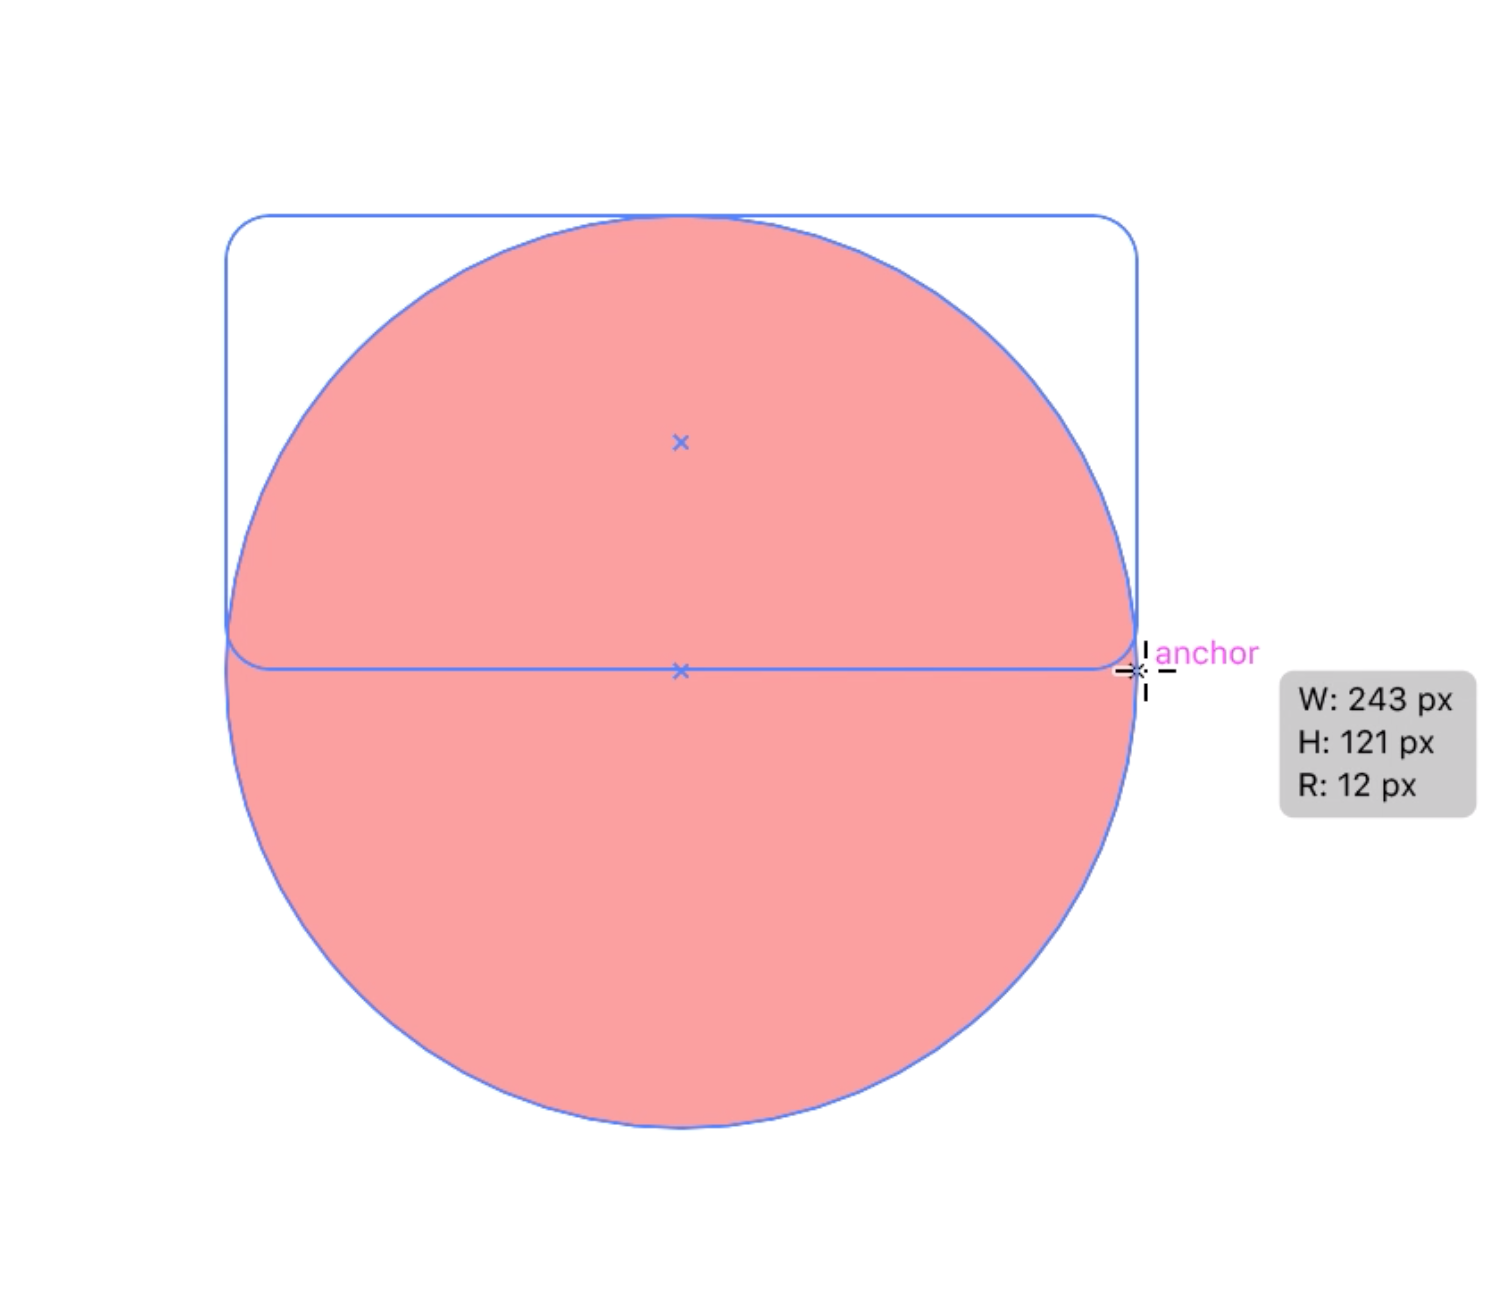 After dragging the rounded rectangle out, the cursor is located at the anchor point of the circle